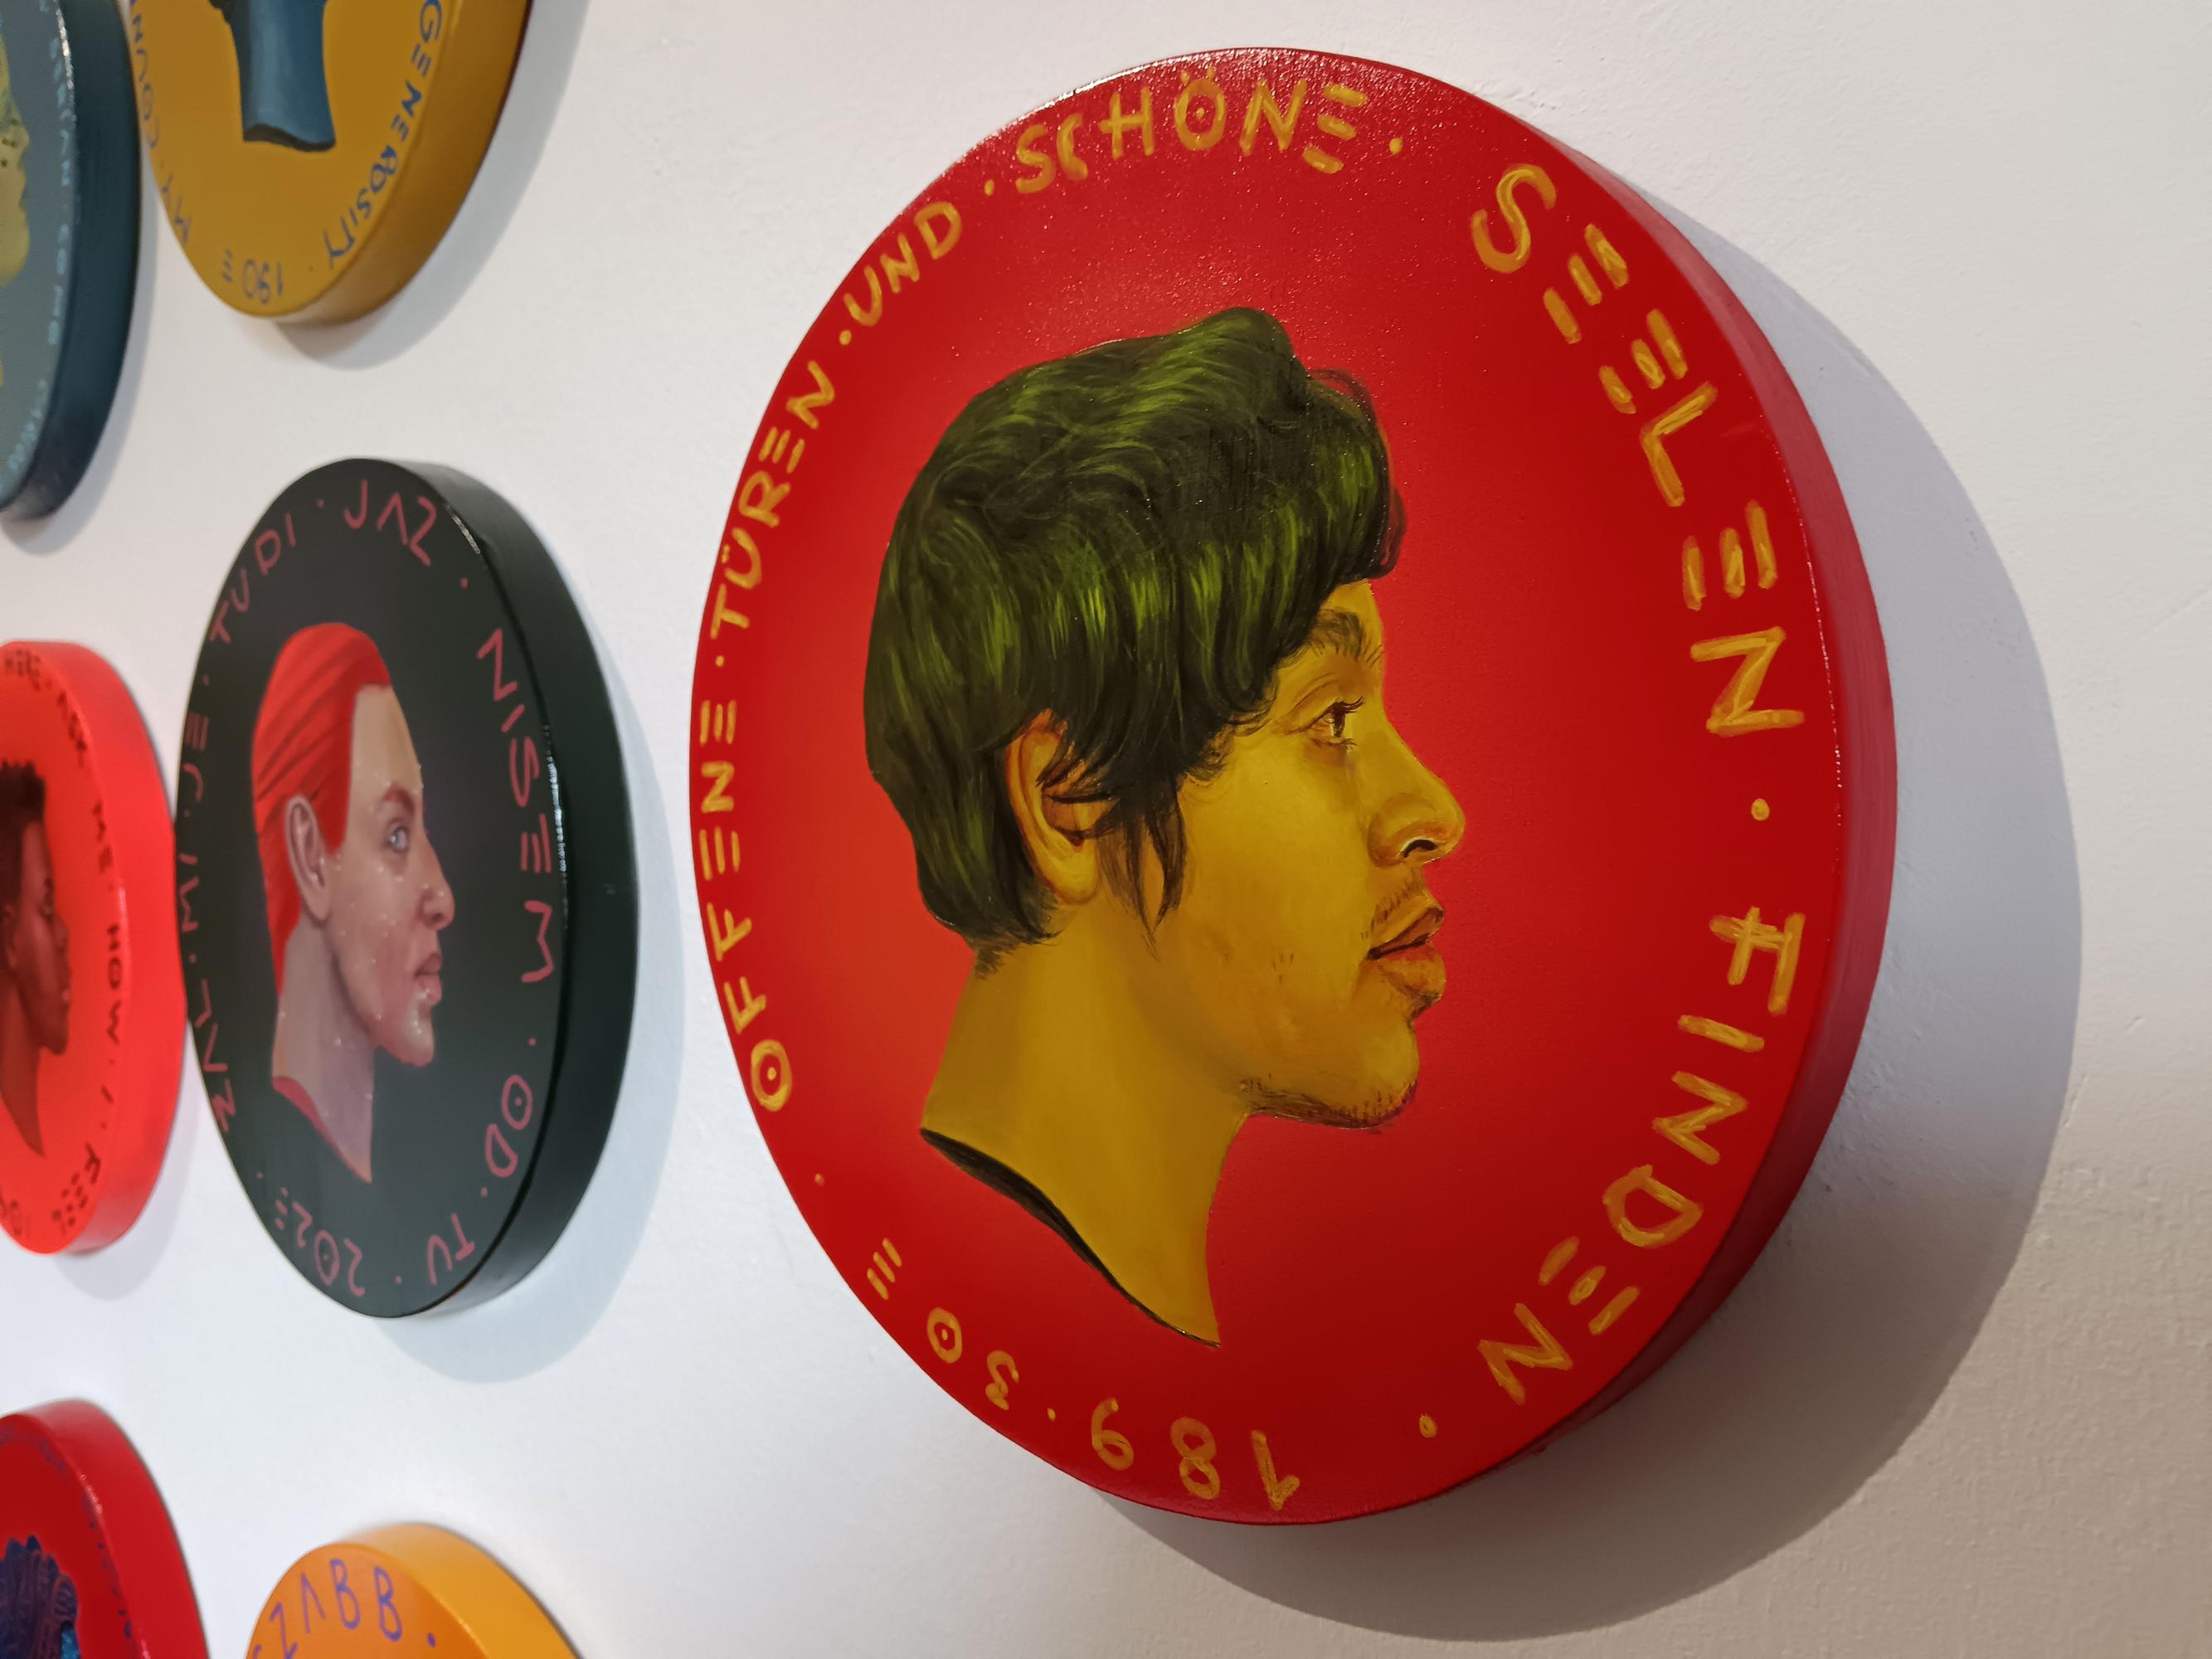 This piece from Natasha Lelenco's Exchange Currencies series, painted in acrylic with yellow and ochre tones against an intense red background, features a hyperrealistic profile portrait of a young person on a 26cm wooden piece that emulates a coin.